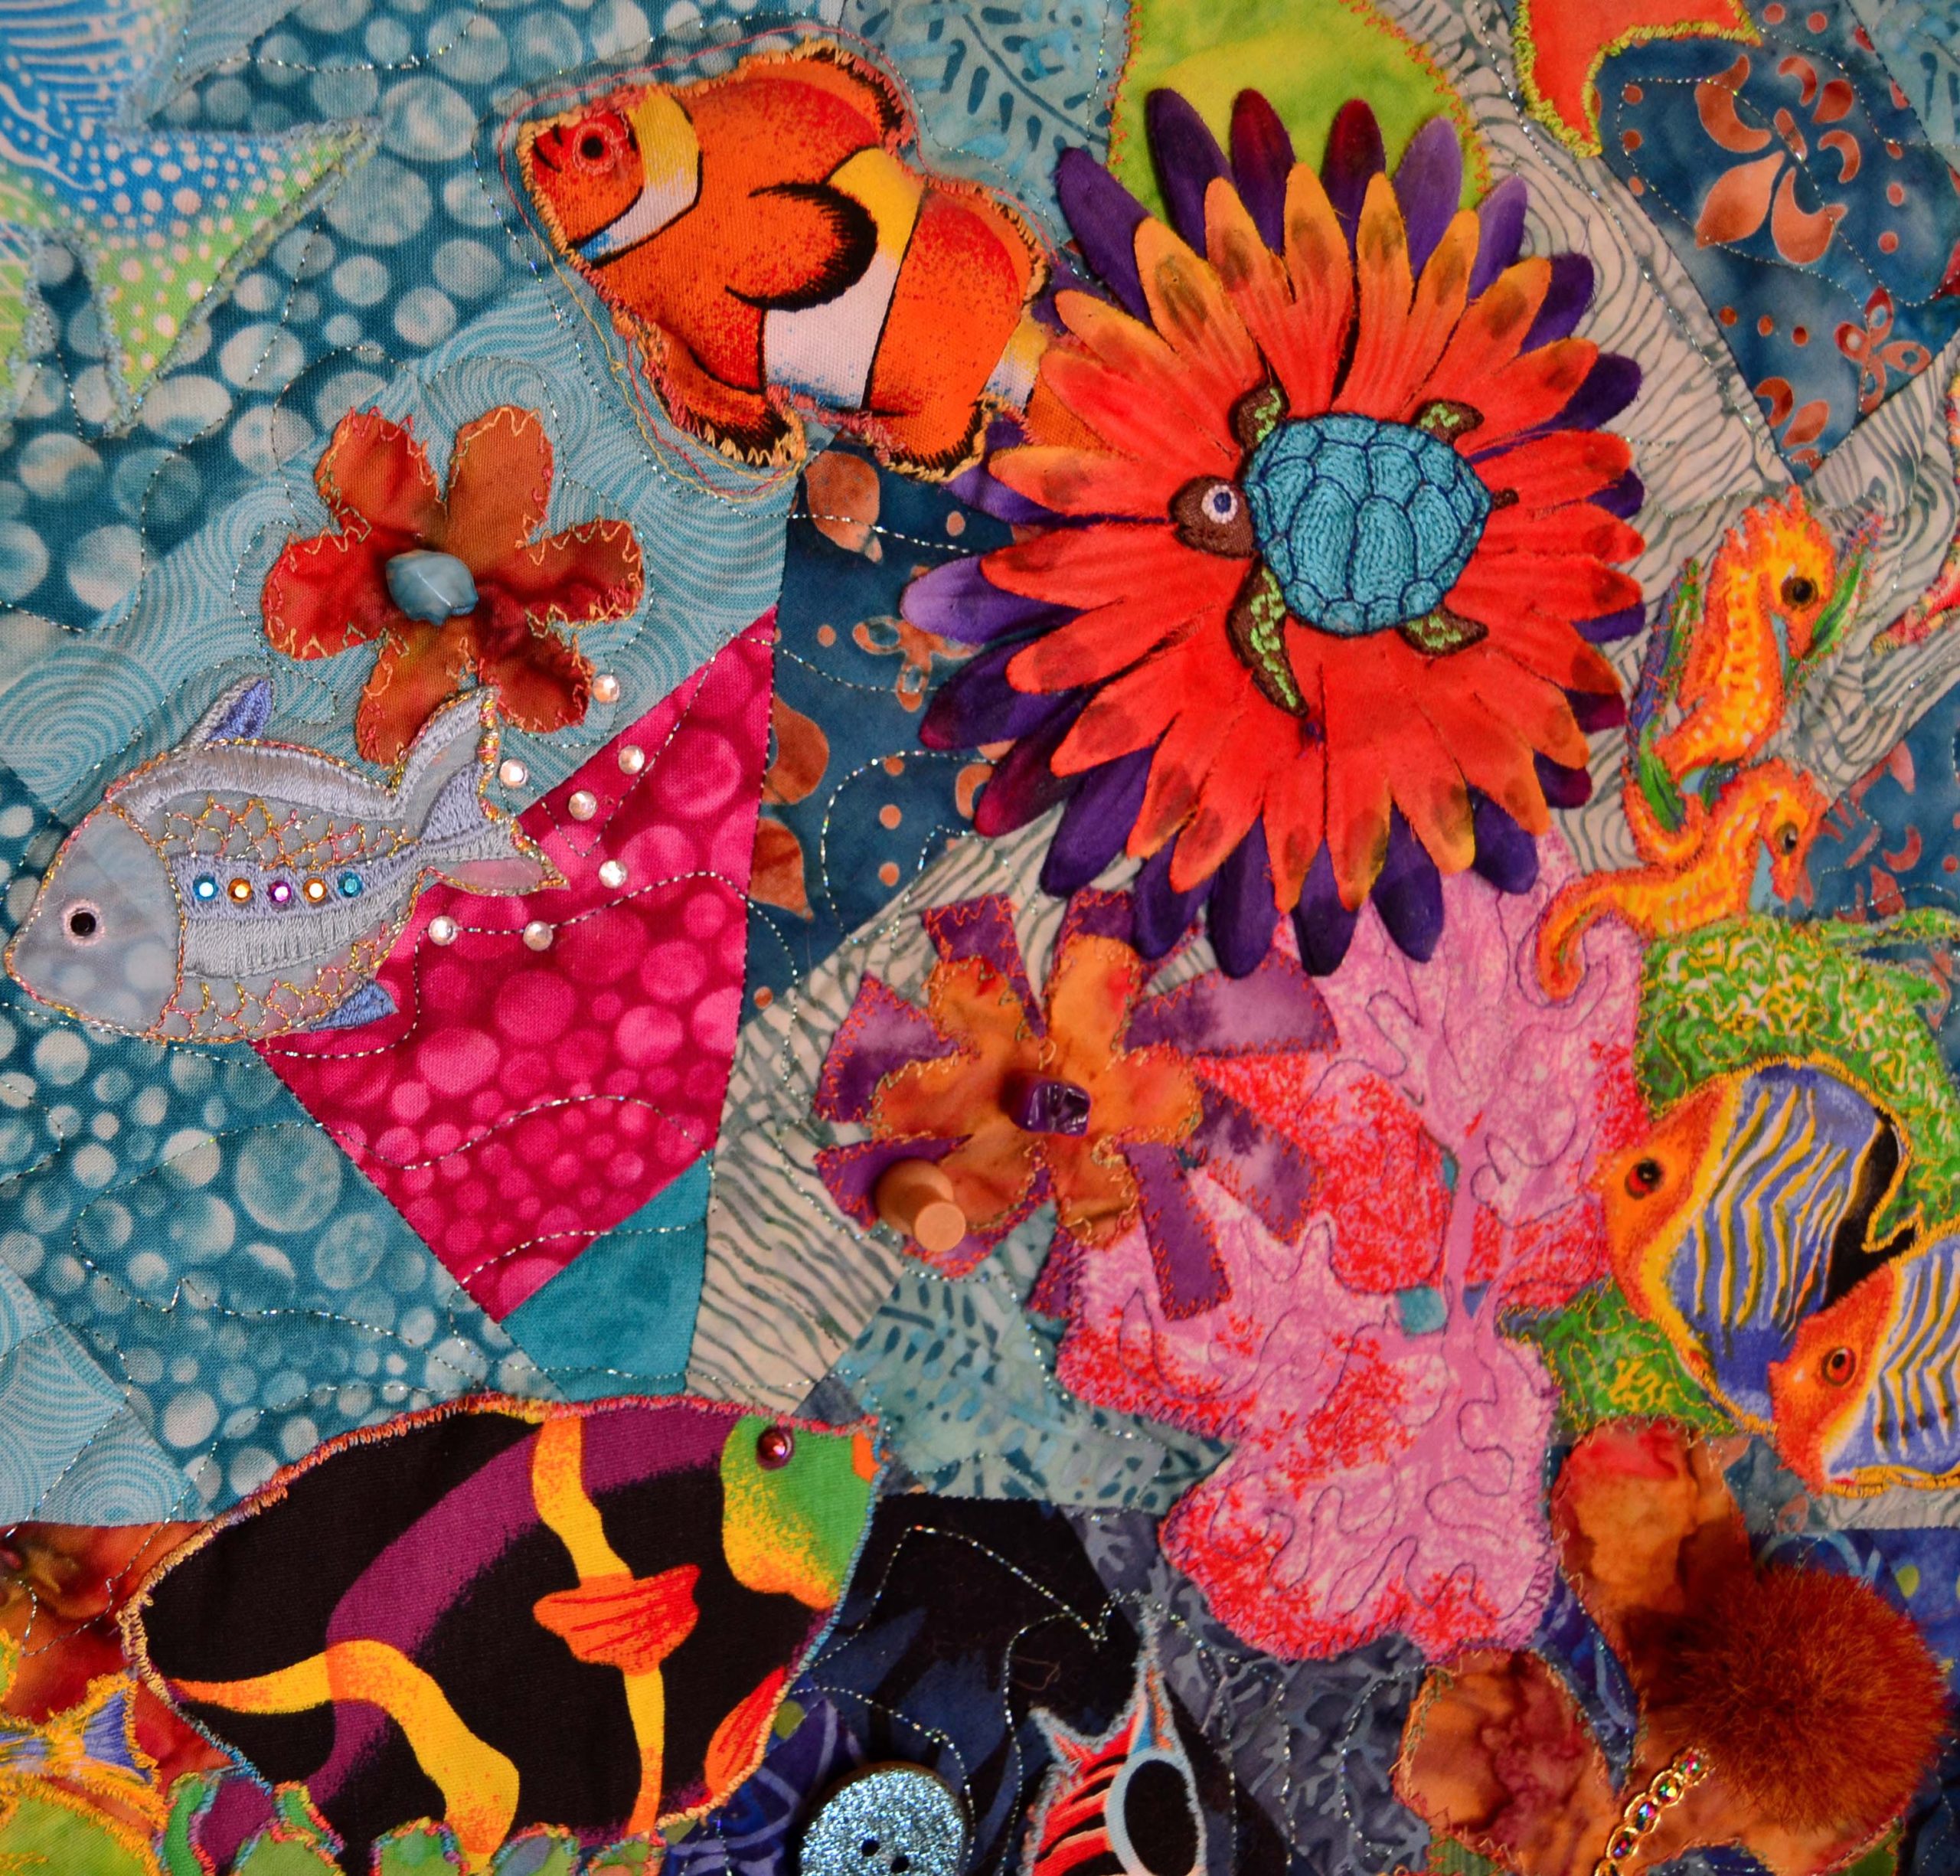 Tropical fish on a coral reef quilt. The quilt bursts and pops with 3-dimensional effect thanks to quilting foam